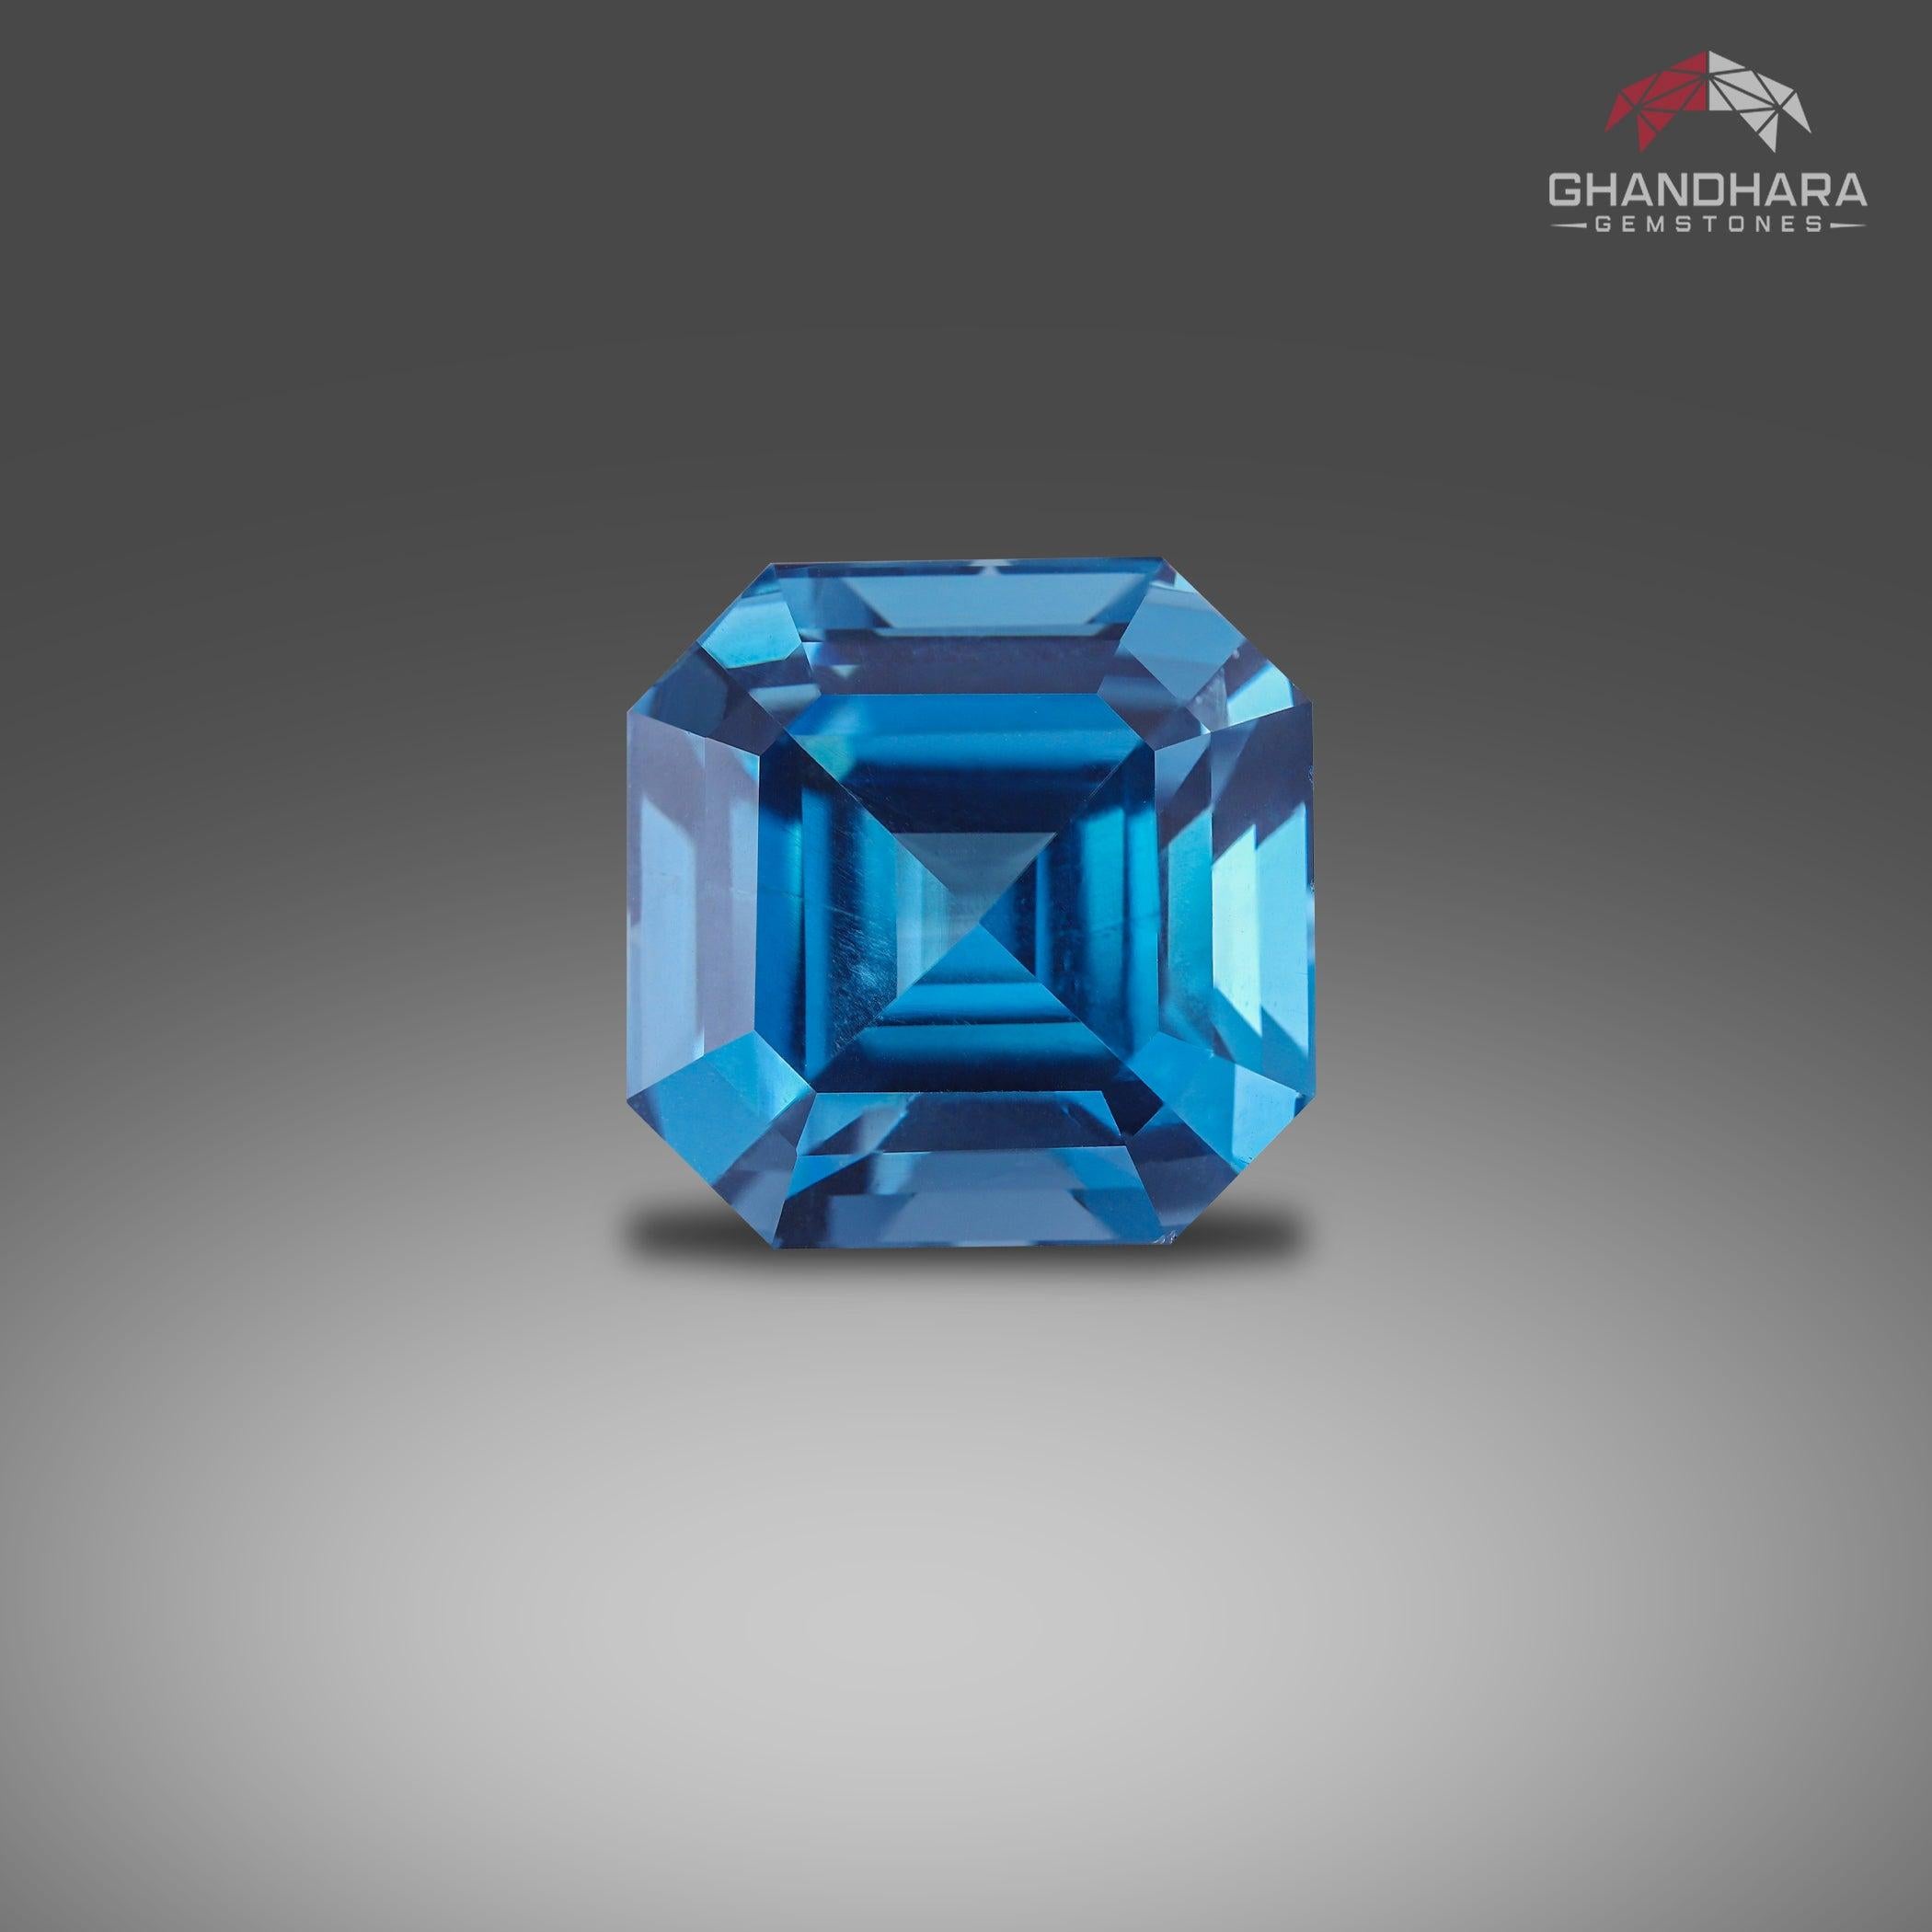 London Blue Topaz Asscher Cut of 16.60 carats from Madagascar has a wonderful cut in a Square shape, incredible Blue color. Great brilliance. This gem is totally Loupe-Clean. 

Product Information:
GEMSTONE NAME:	London Blue Topaz Asscher